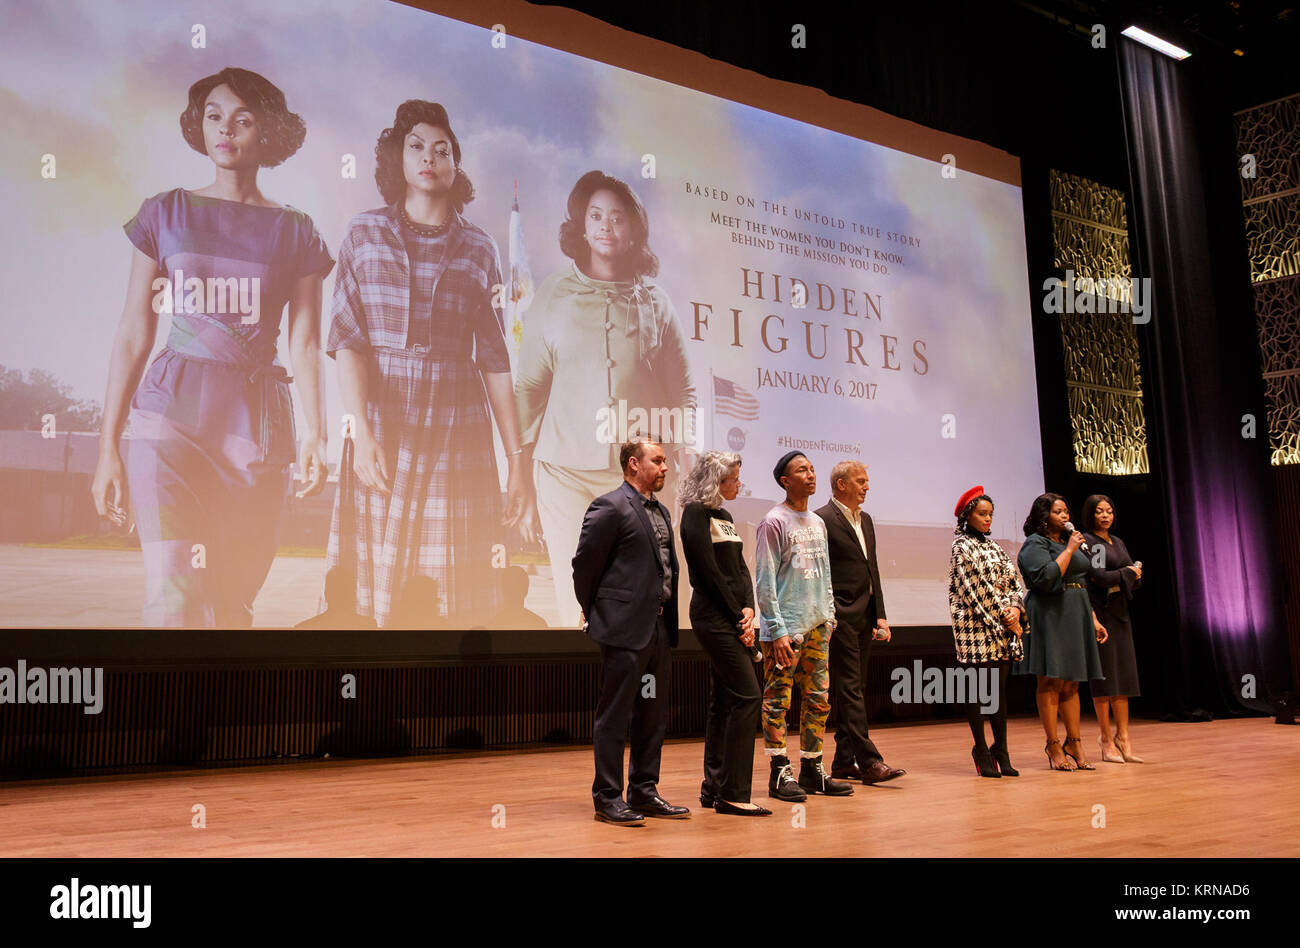 From left: director Theodore Melfi, producer Mimi Valdés,  American singer-songwriter Pharrell Williams, American actor, film director, and producer Kevin Costner, American musical recording artist, actress, and model Janelle Monáe, American actress Octavia Spencer, and American actress and singer Taraji P. Henson, are seen on stage prior to a screening of the film “Hidden Figures” at the Smithsonian’s National Museum of African American History and Culture, Wednesday, Dec. 14, 2016 in Washington DC. The film is based on the book of the same title, by Margot Lee Shetterly, and chronicles the l Stock Photo